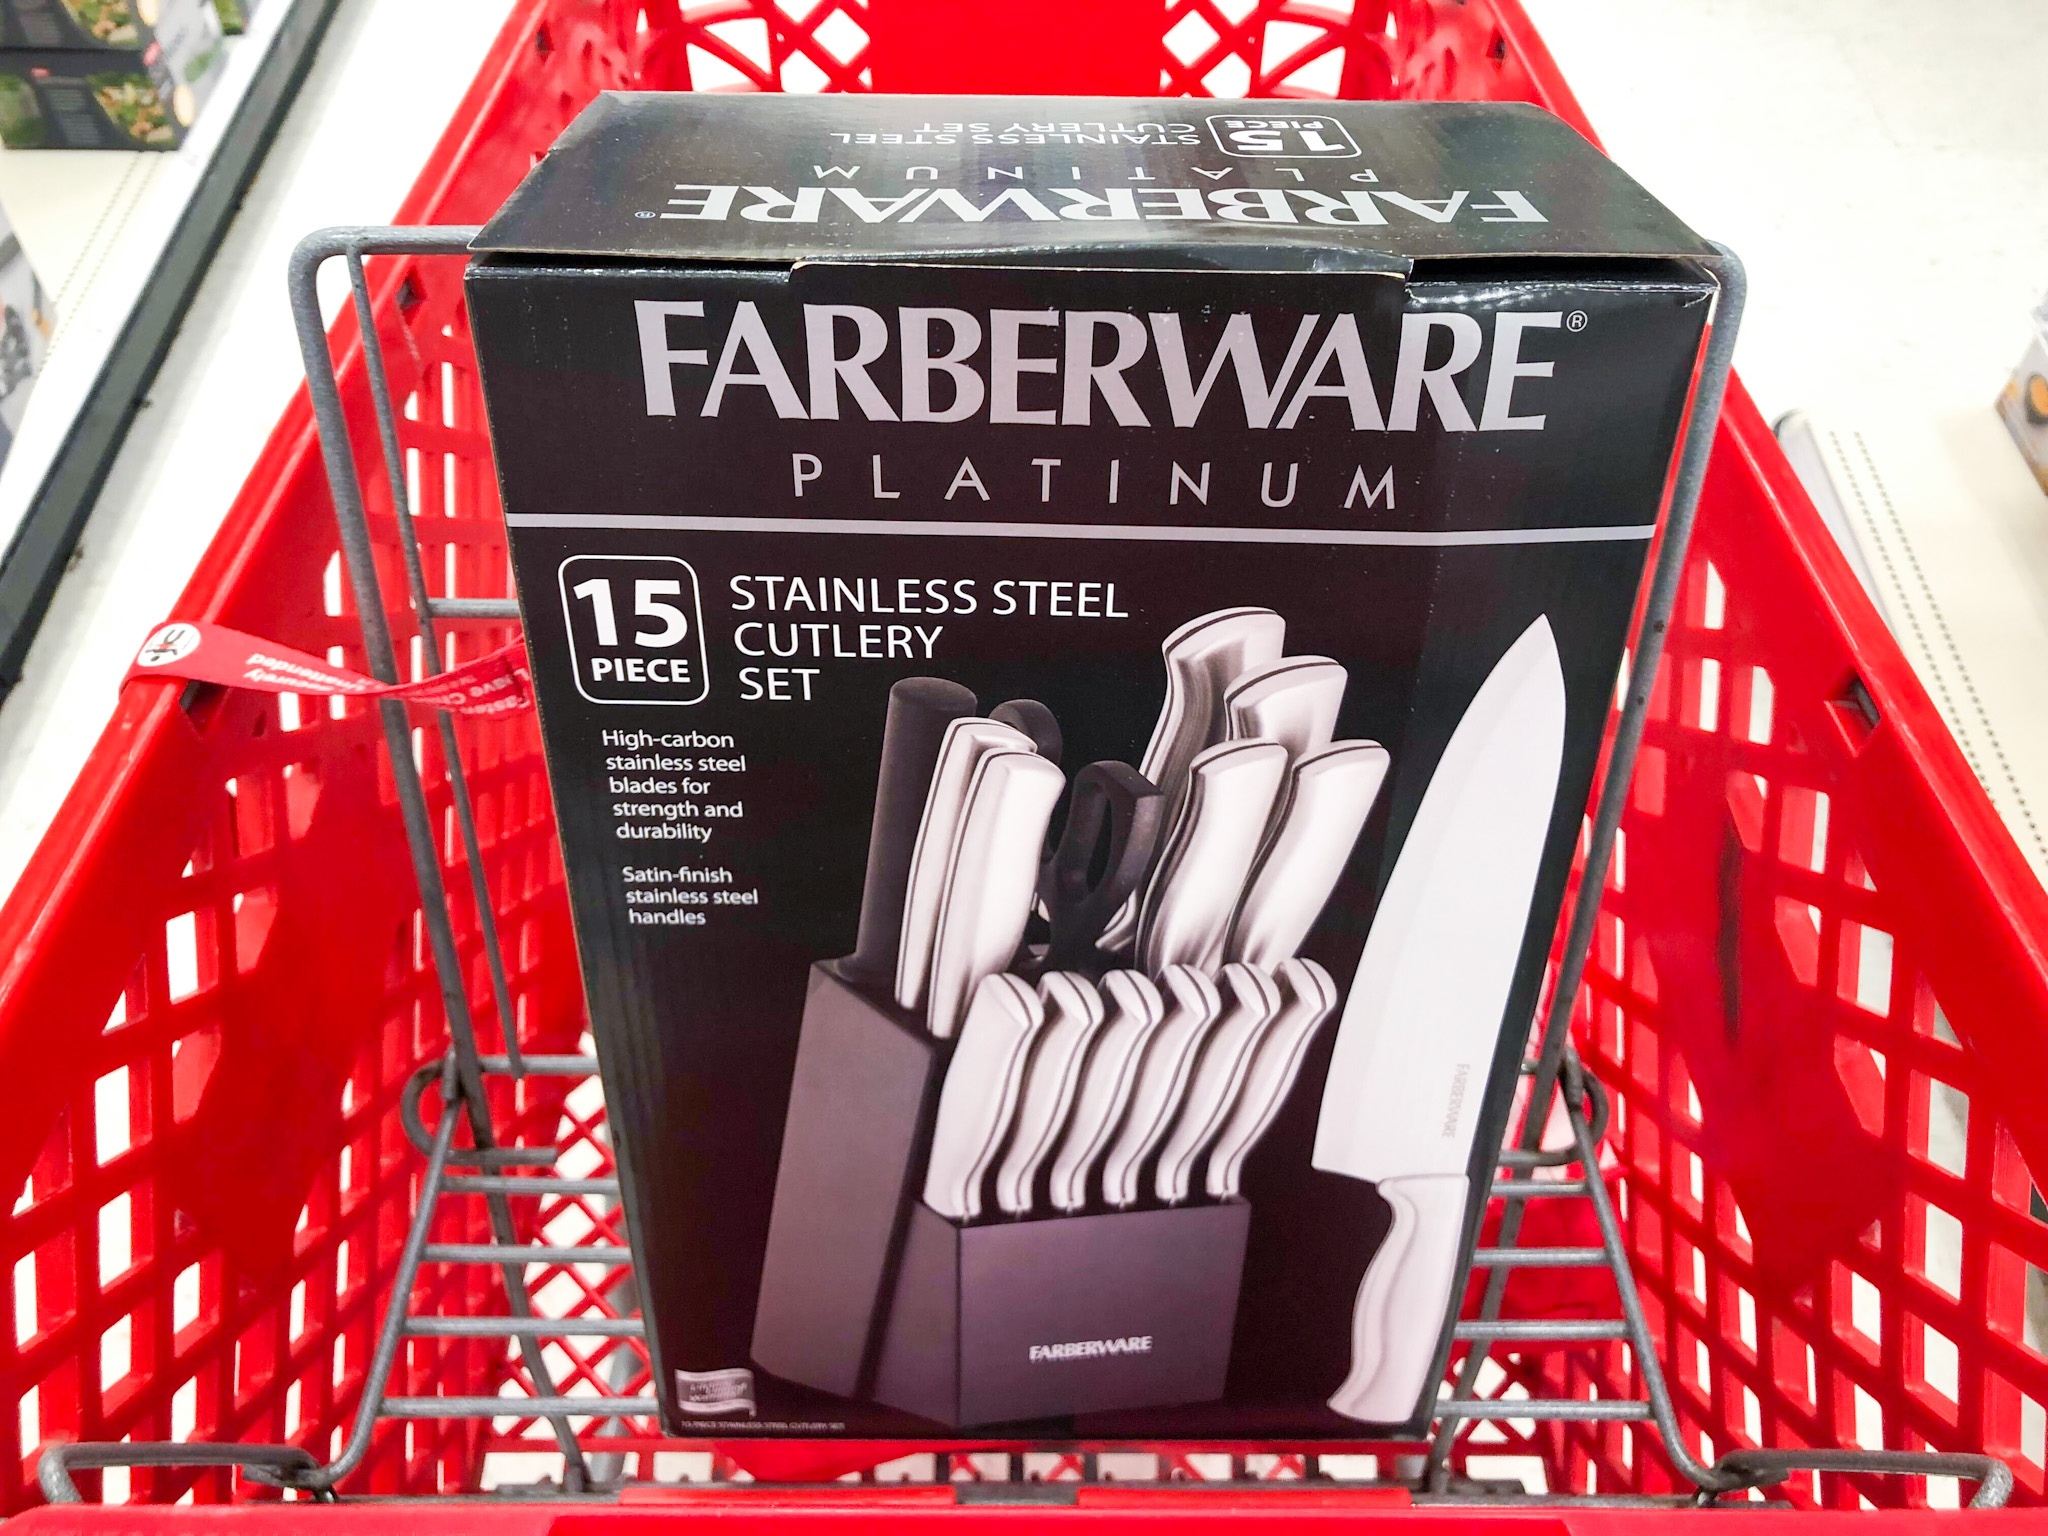 Farberware 15-Piece Knife Block Set, Only $18.99 at Target (Reg. $49.99) -  The Krazy Coupon Lady